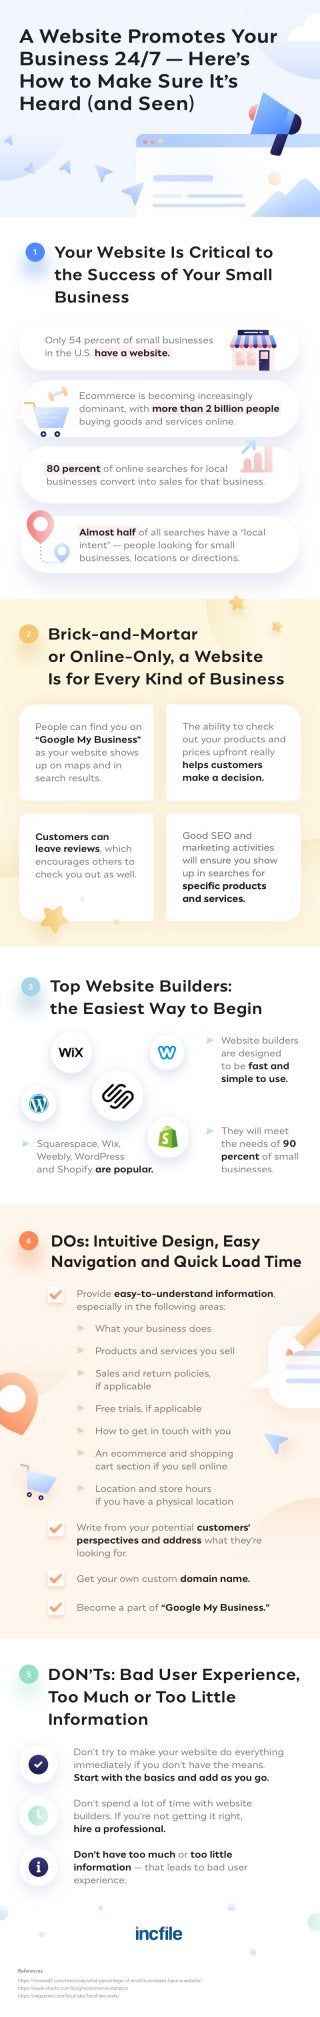 The Do's and Don’ts of Creating a Website for Your Small Business